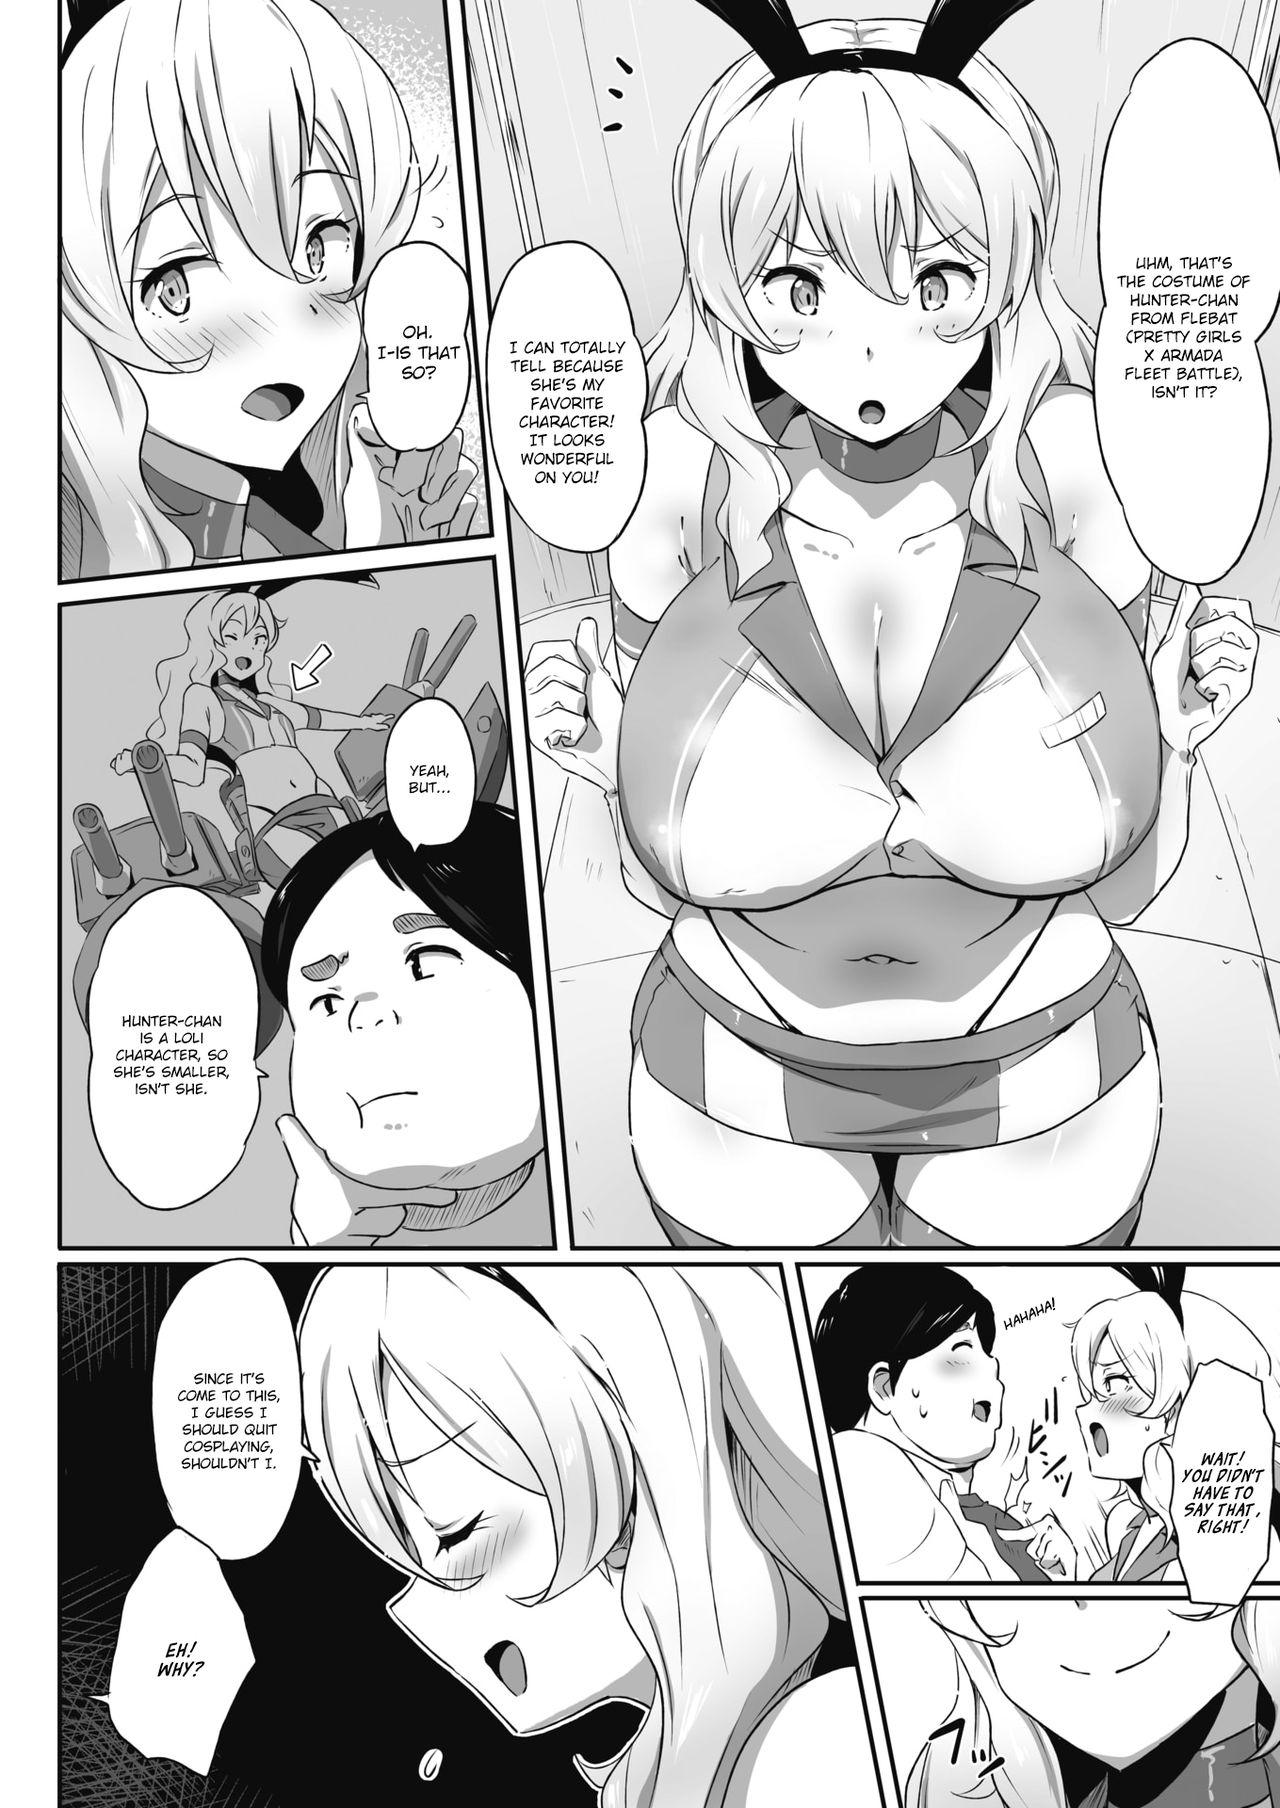 Boob Eimy Accident! | Amy Incident! Ecuador - Page 4